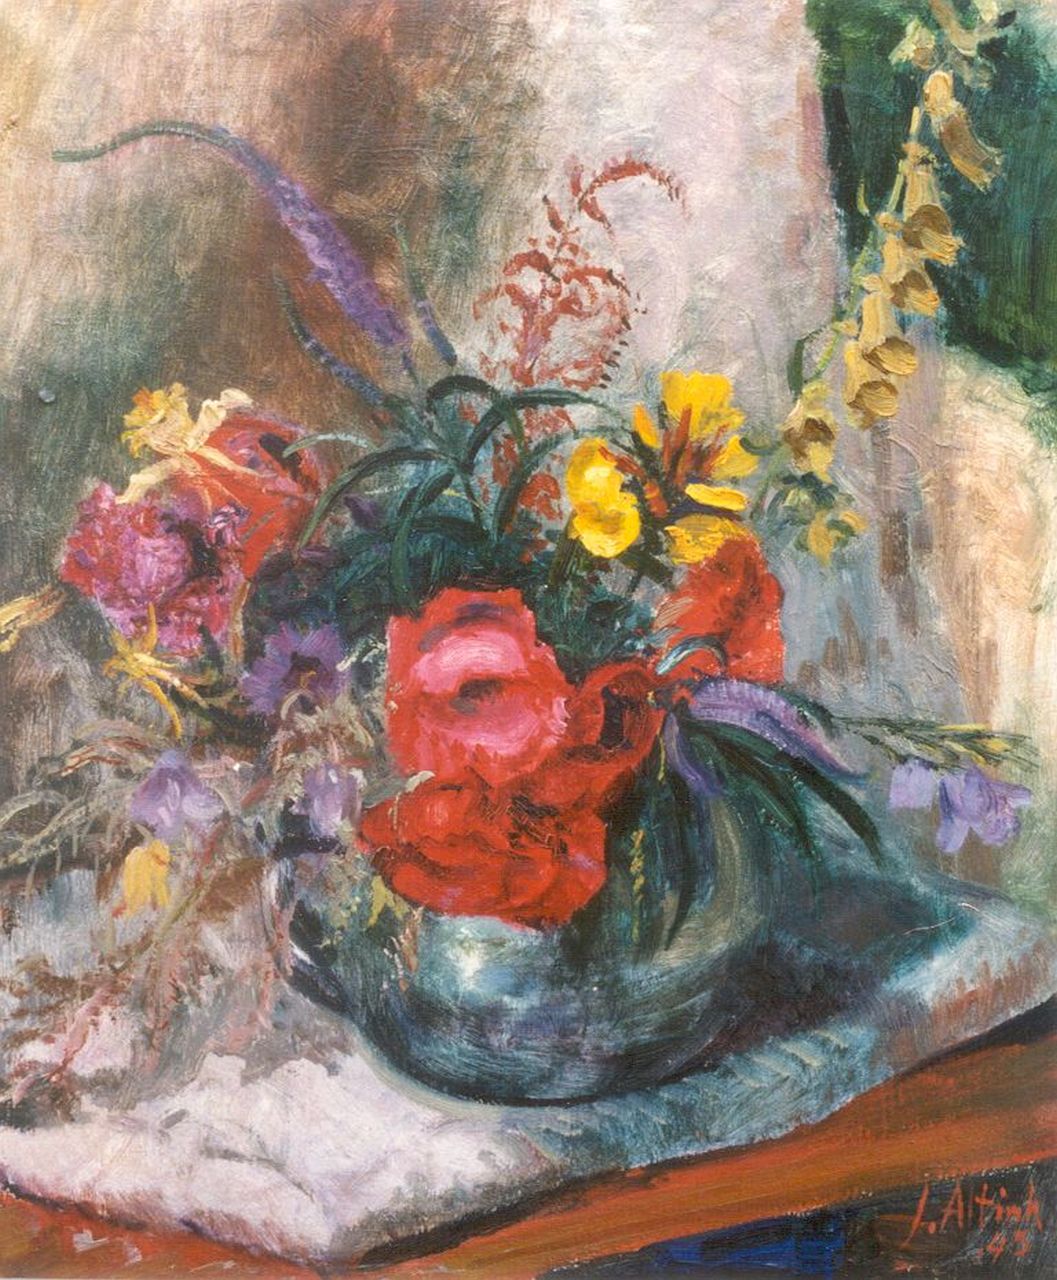 Altink J.  | Jan Altink, A flower still life, oil on canvas 60.2 x 49.8 cm, signed l.r. and dated '43